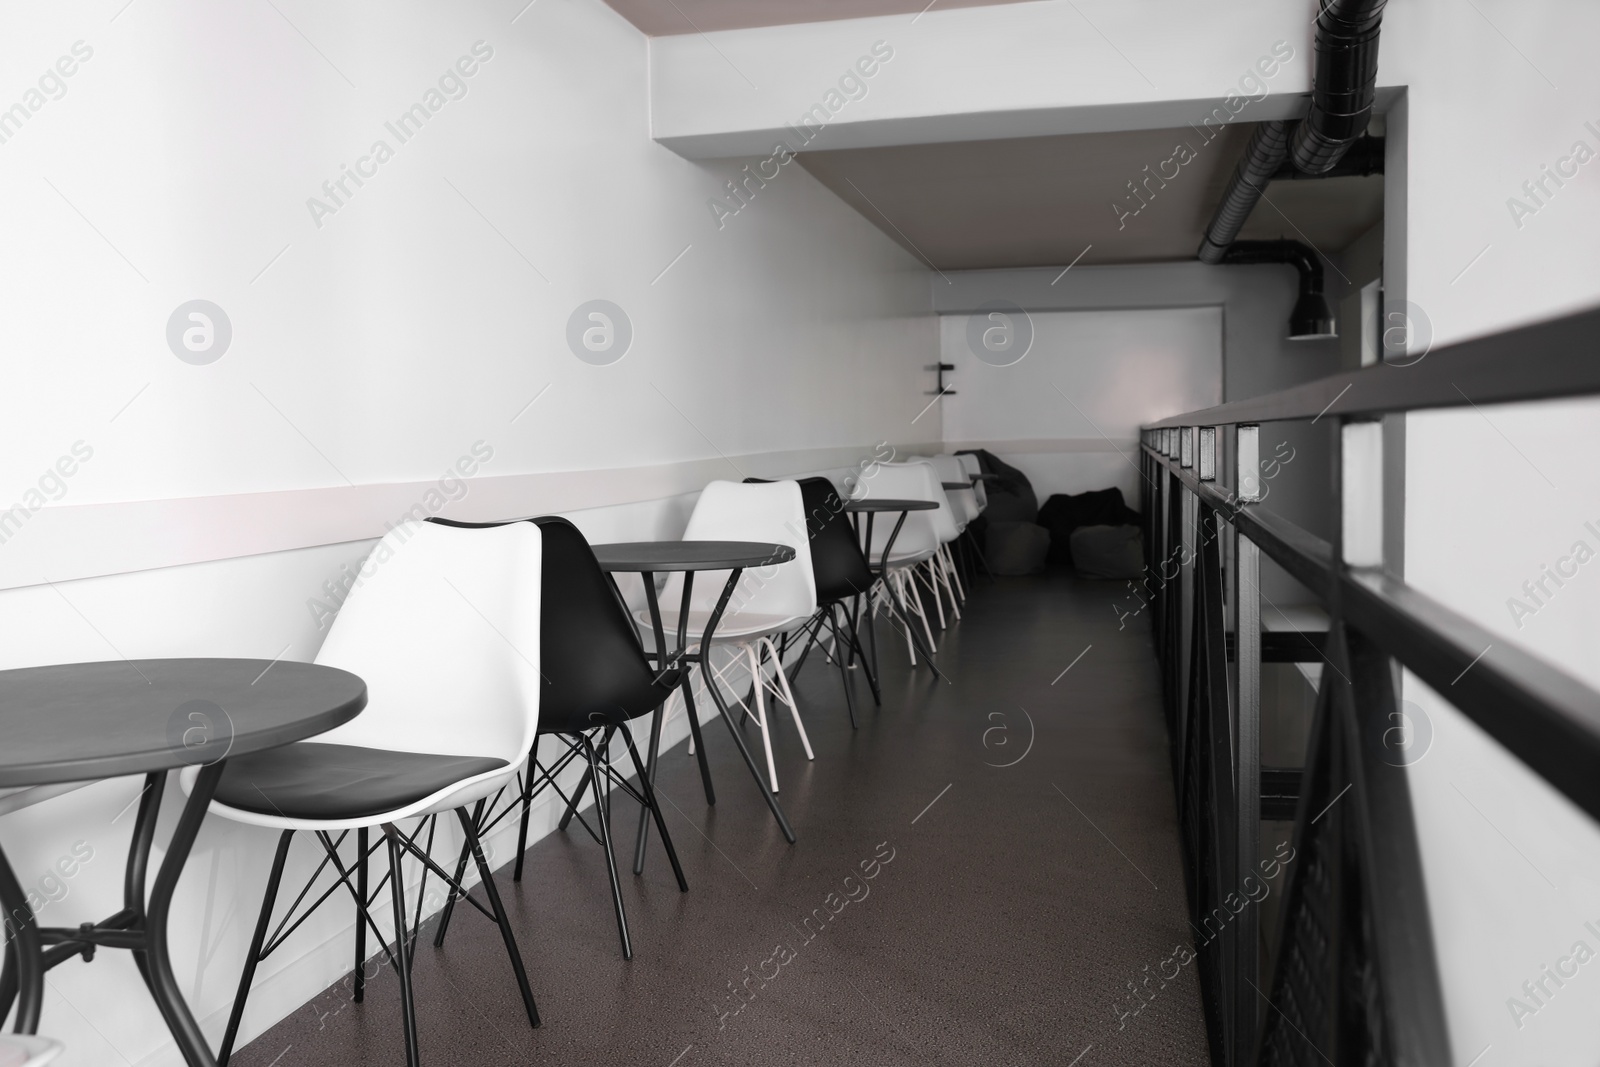 Photo of Hostel dining room interior with tables and chairs along white wall